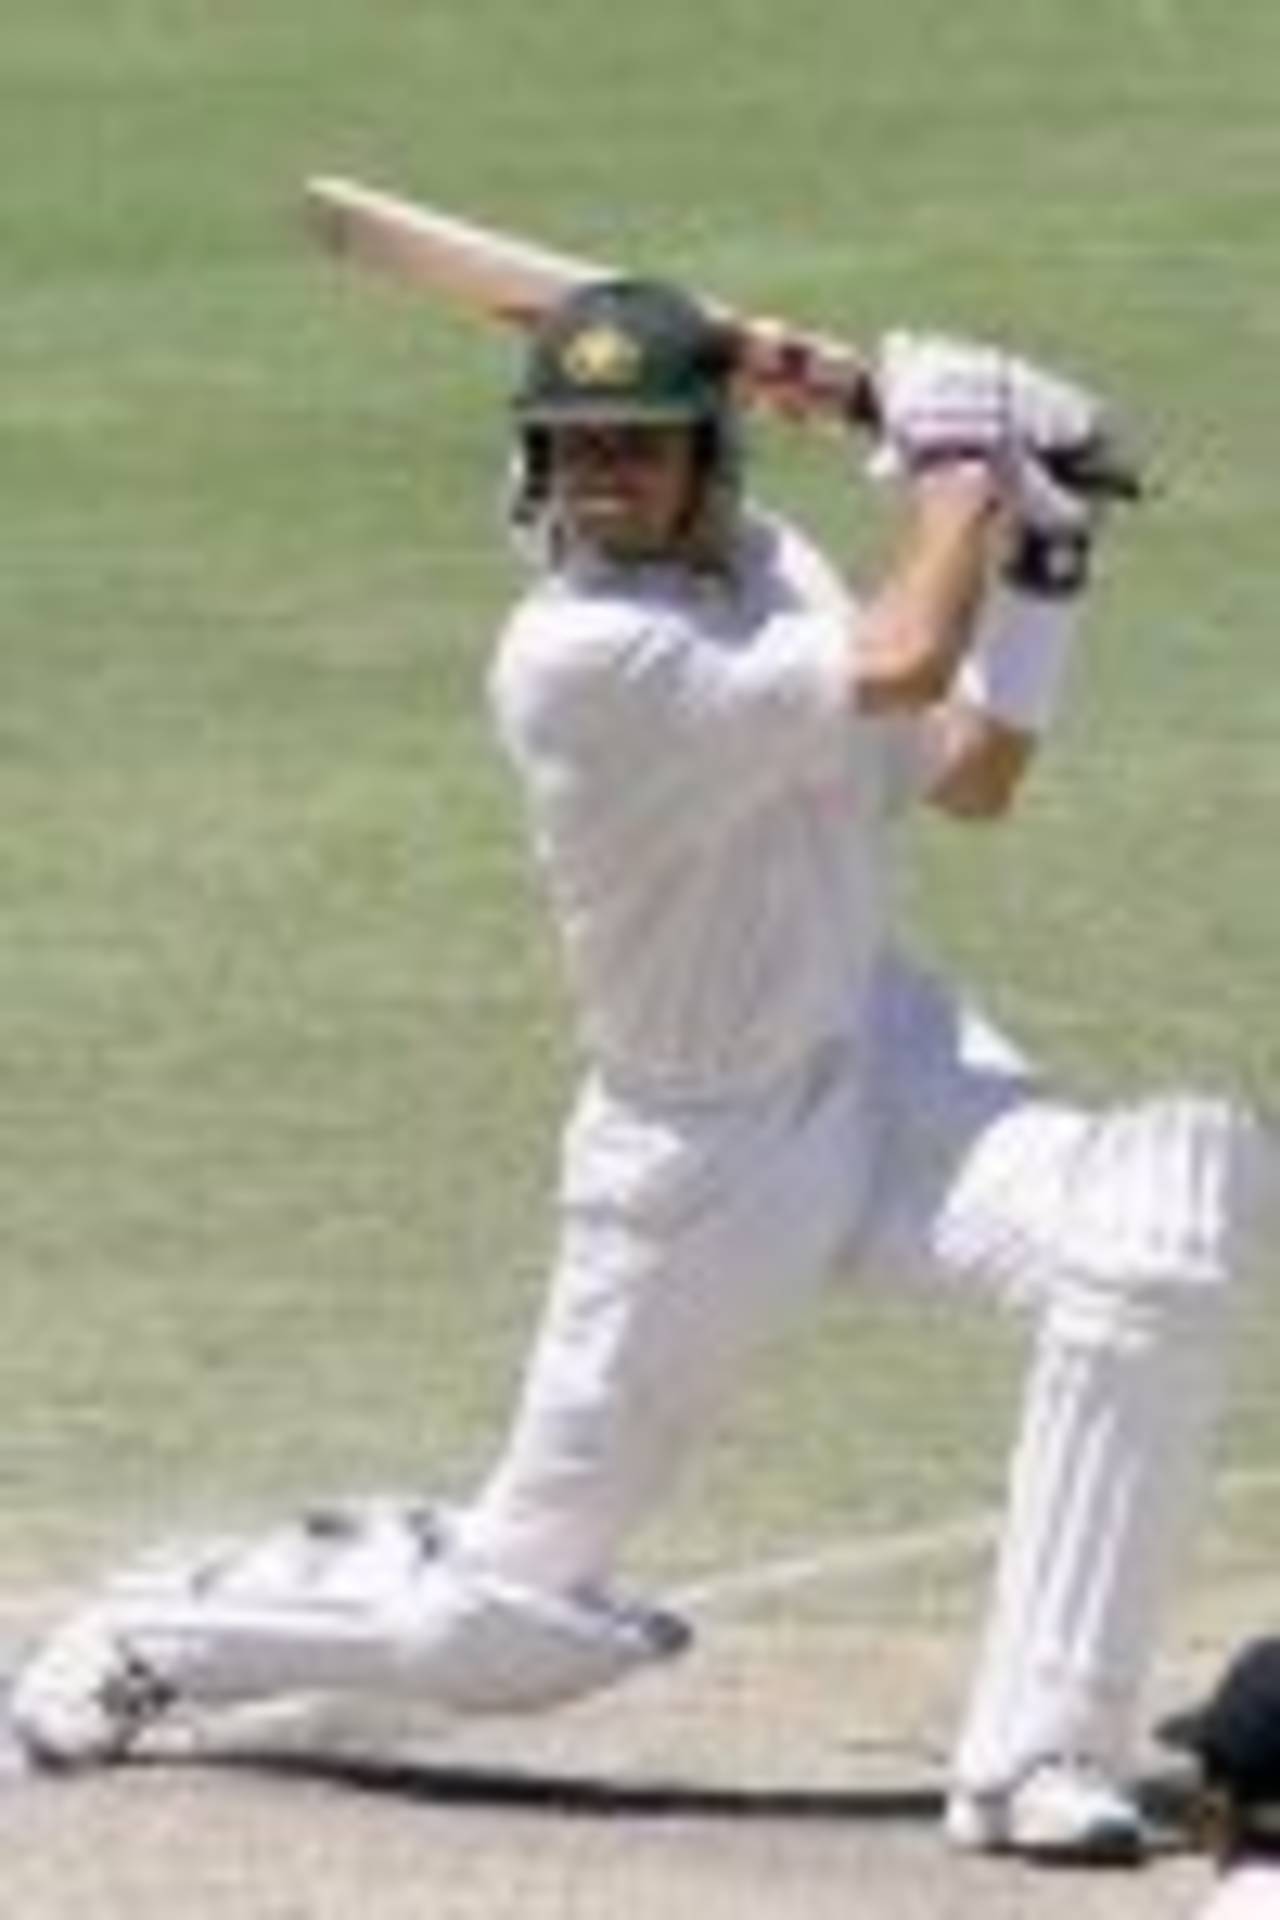 13 Dec 1999: Greg Blewett of Australia drives on his way to 88, on day four of the first test between Australia and India, at the Adelaide Oval, Adelaide, Australia.